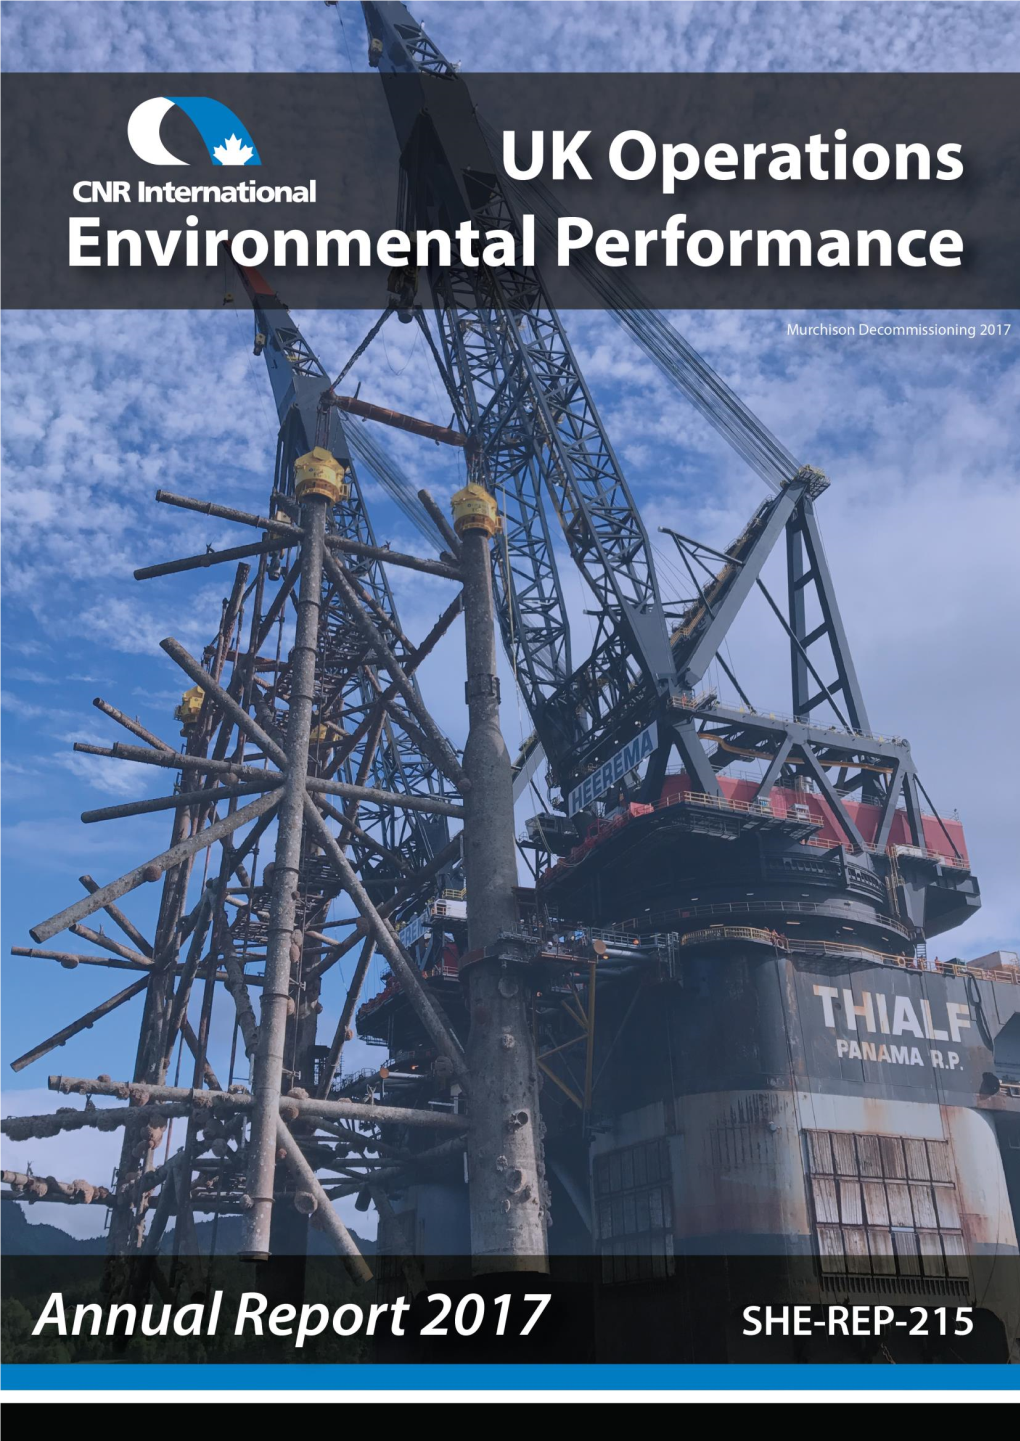 CNR International’S EMS and Company Environmental Performance Against Internal Targets and Legislative Requirements